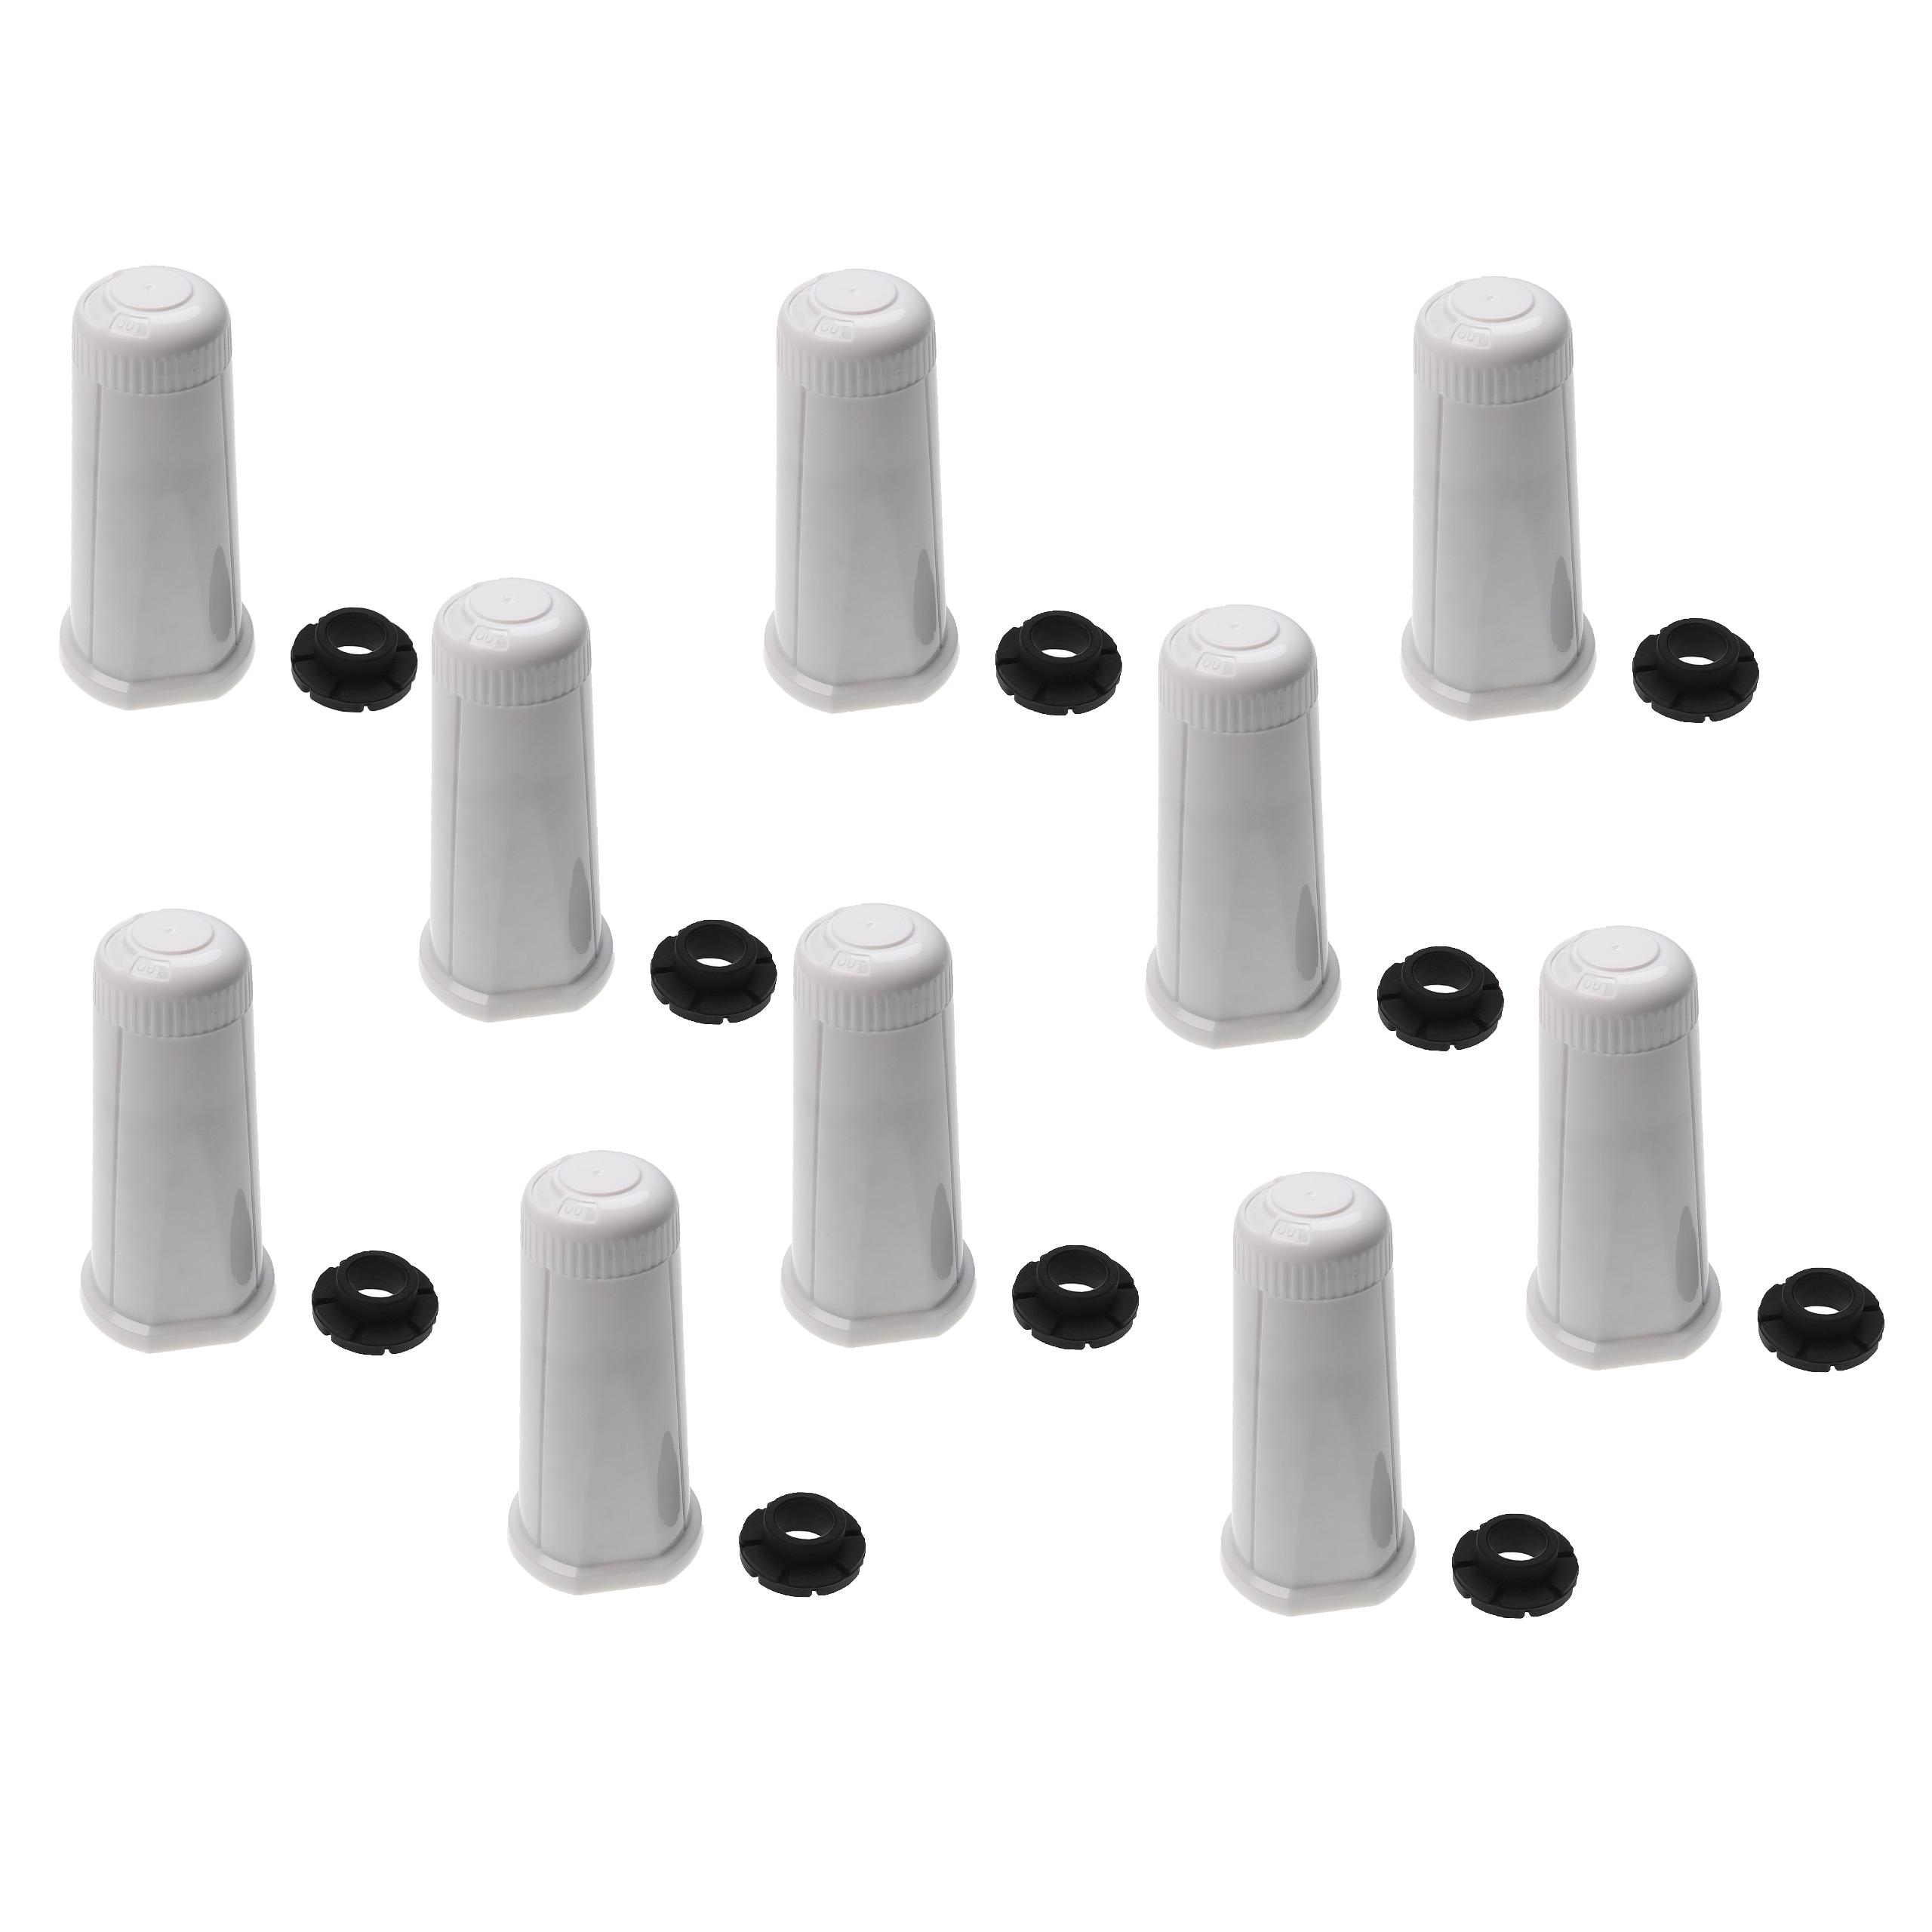 10x Water Filter replaces Sage BES008 for Breville Coffee Machine etc. - White